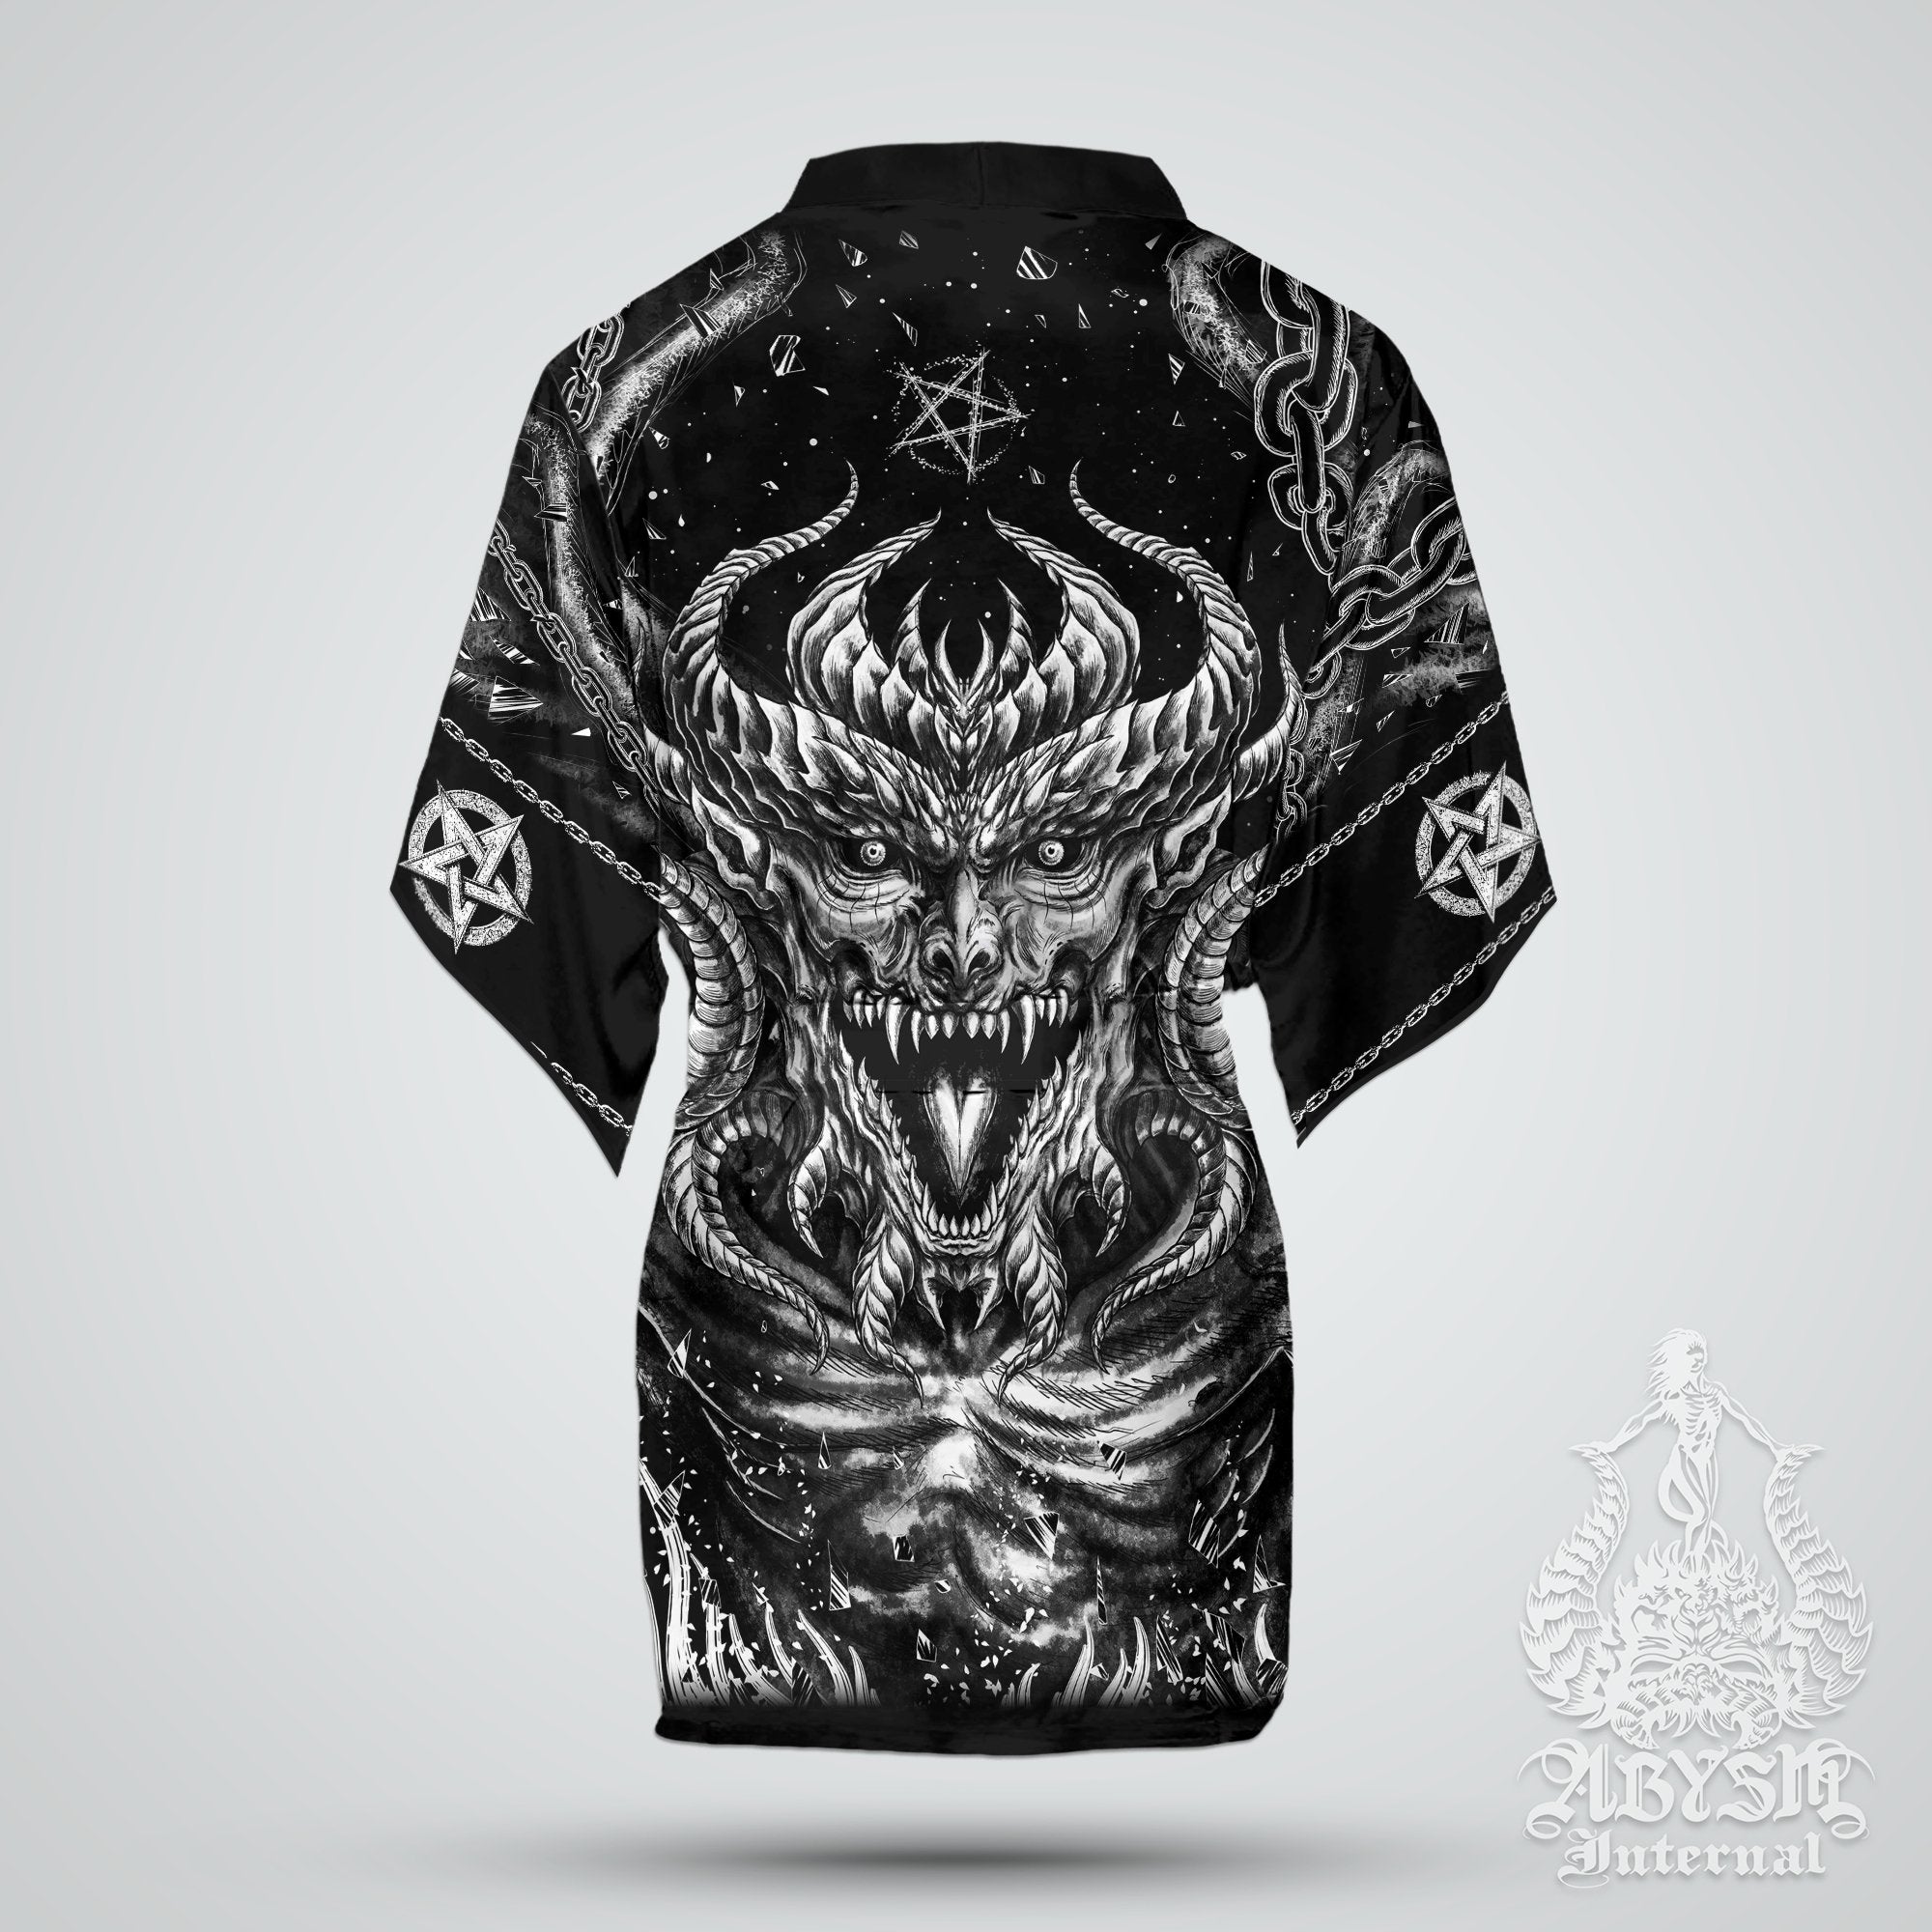 Satanic Cover Up, Beach Outfit, Party Kimono, Metal Summer Festival Robe, Demon, Alternative Clothing, Unisex - Goth Hell, The Devil - Abysm Internal